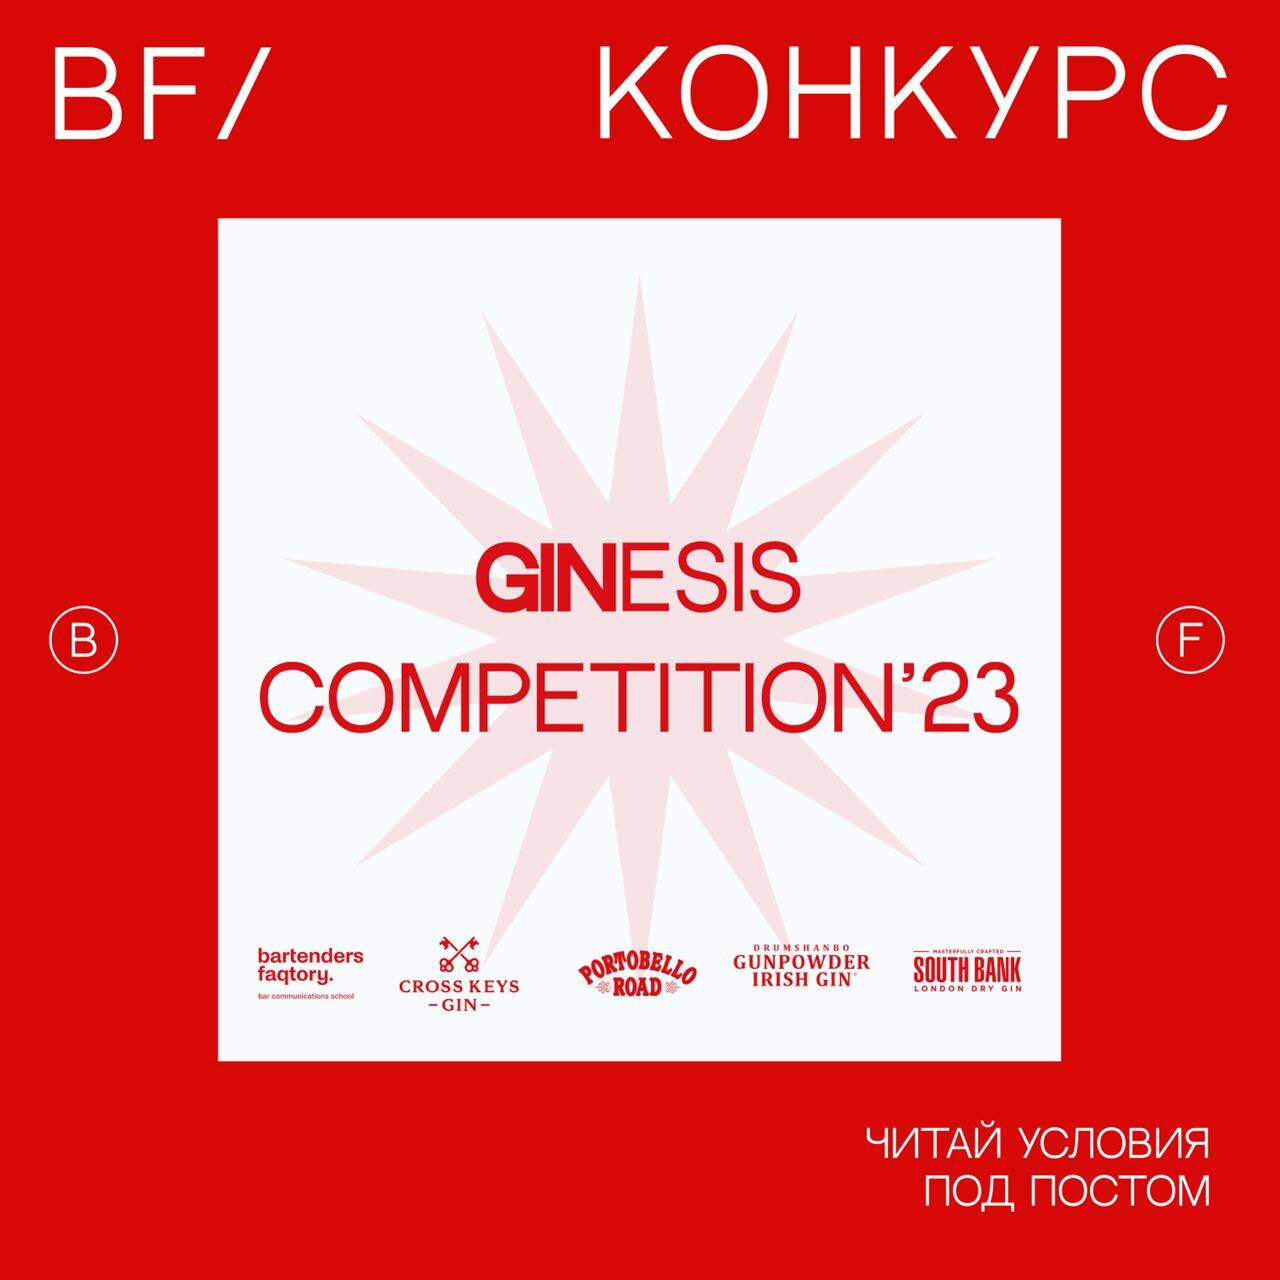 GINESIS COMPETITION'23